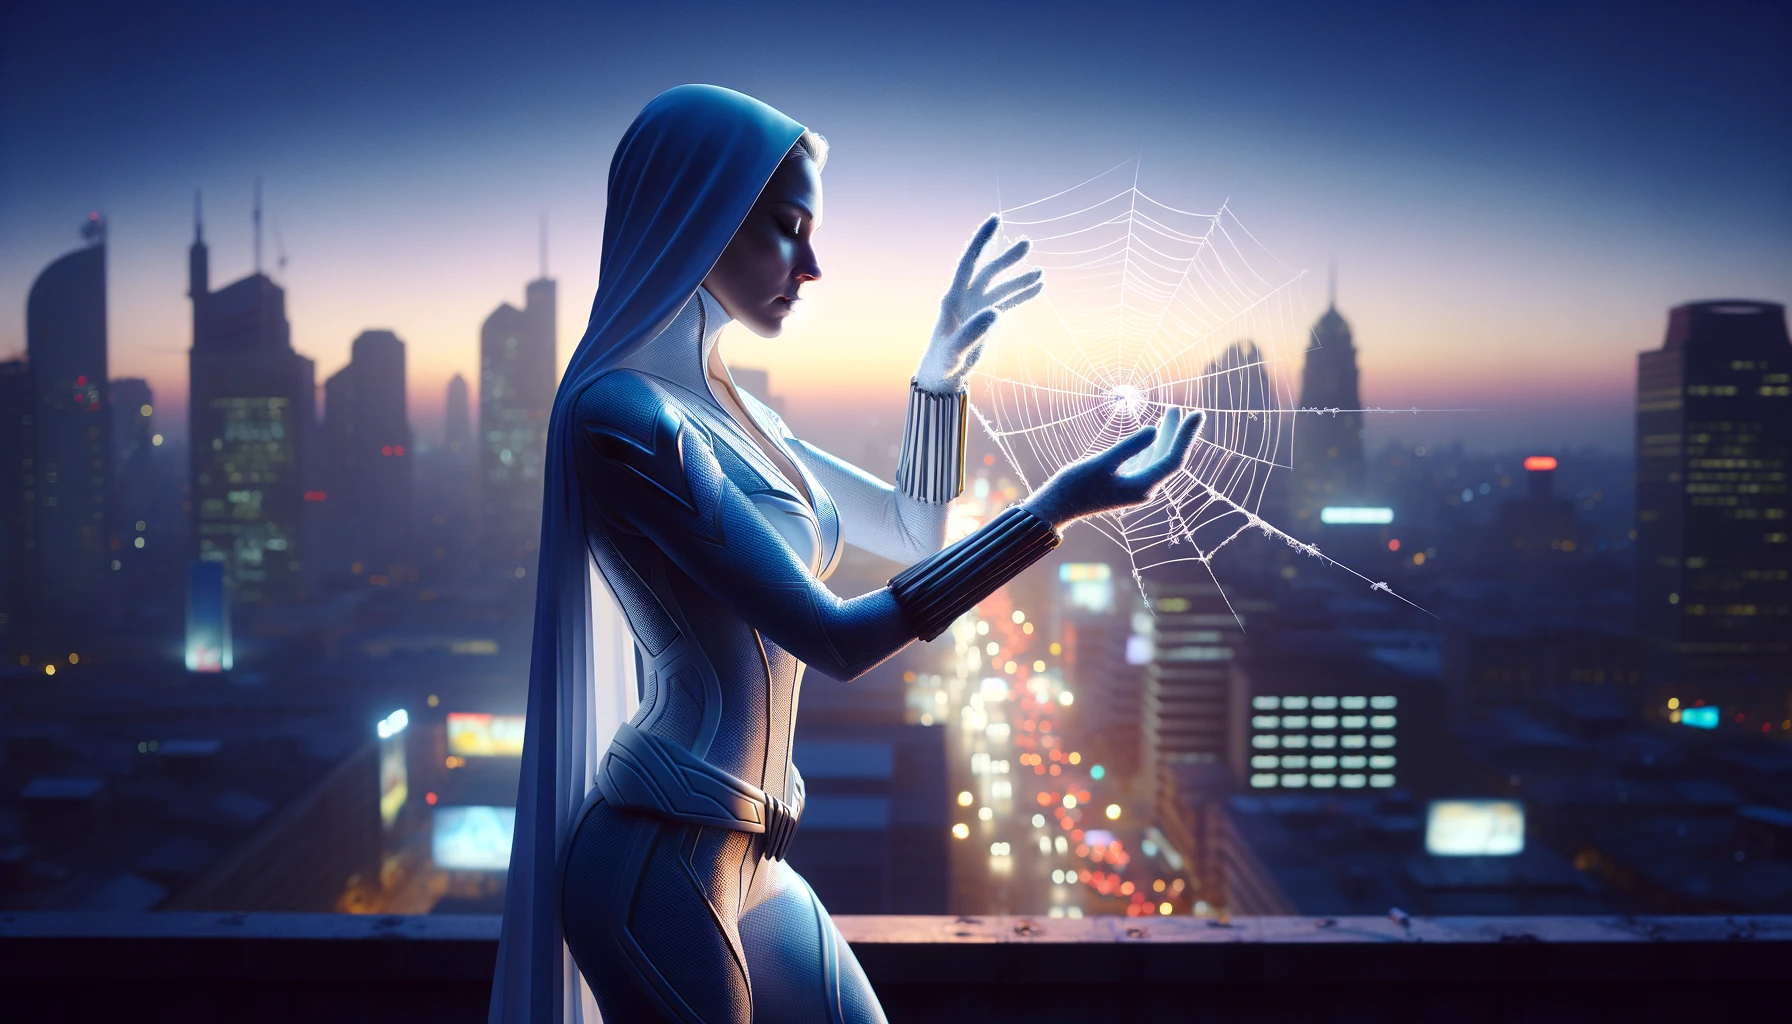 A female superhero in a white suit with a web, stands on the roof of a skyscraper against the backdrop of city lights.